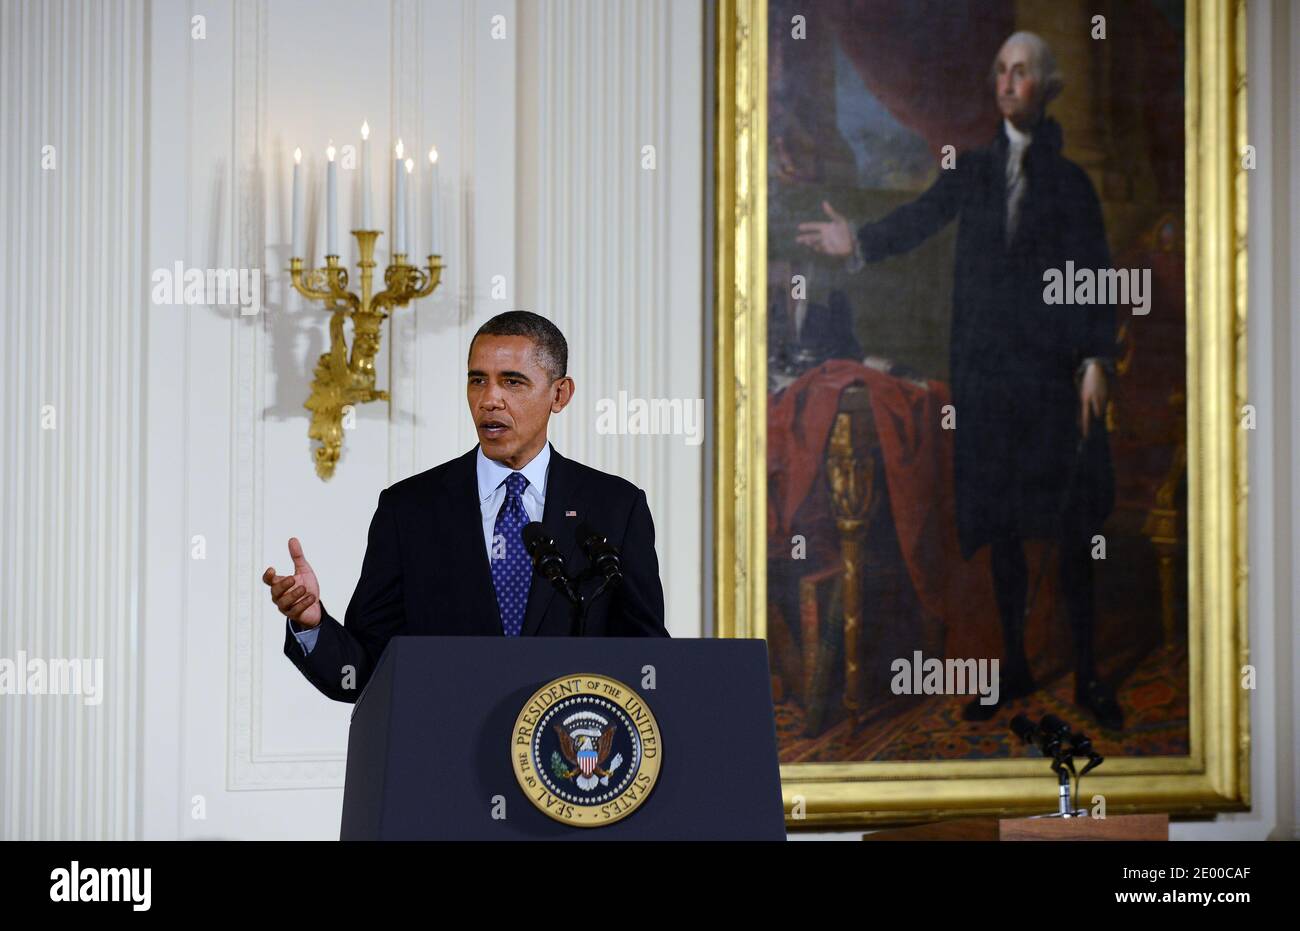 President Barack Obama delirers remarks before awarding Captain William Swenson, U.S. Army, the Medal of Honor during an ceremony in the East Room of the White House in Washington, DC, USA, October 15, 2013.Photo by Olivier Douliery/ABACAPRESS.COM Stock Photo